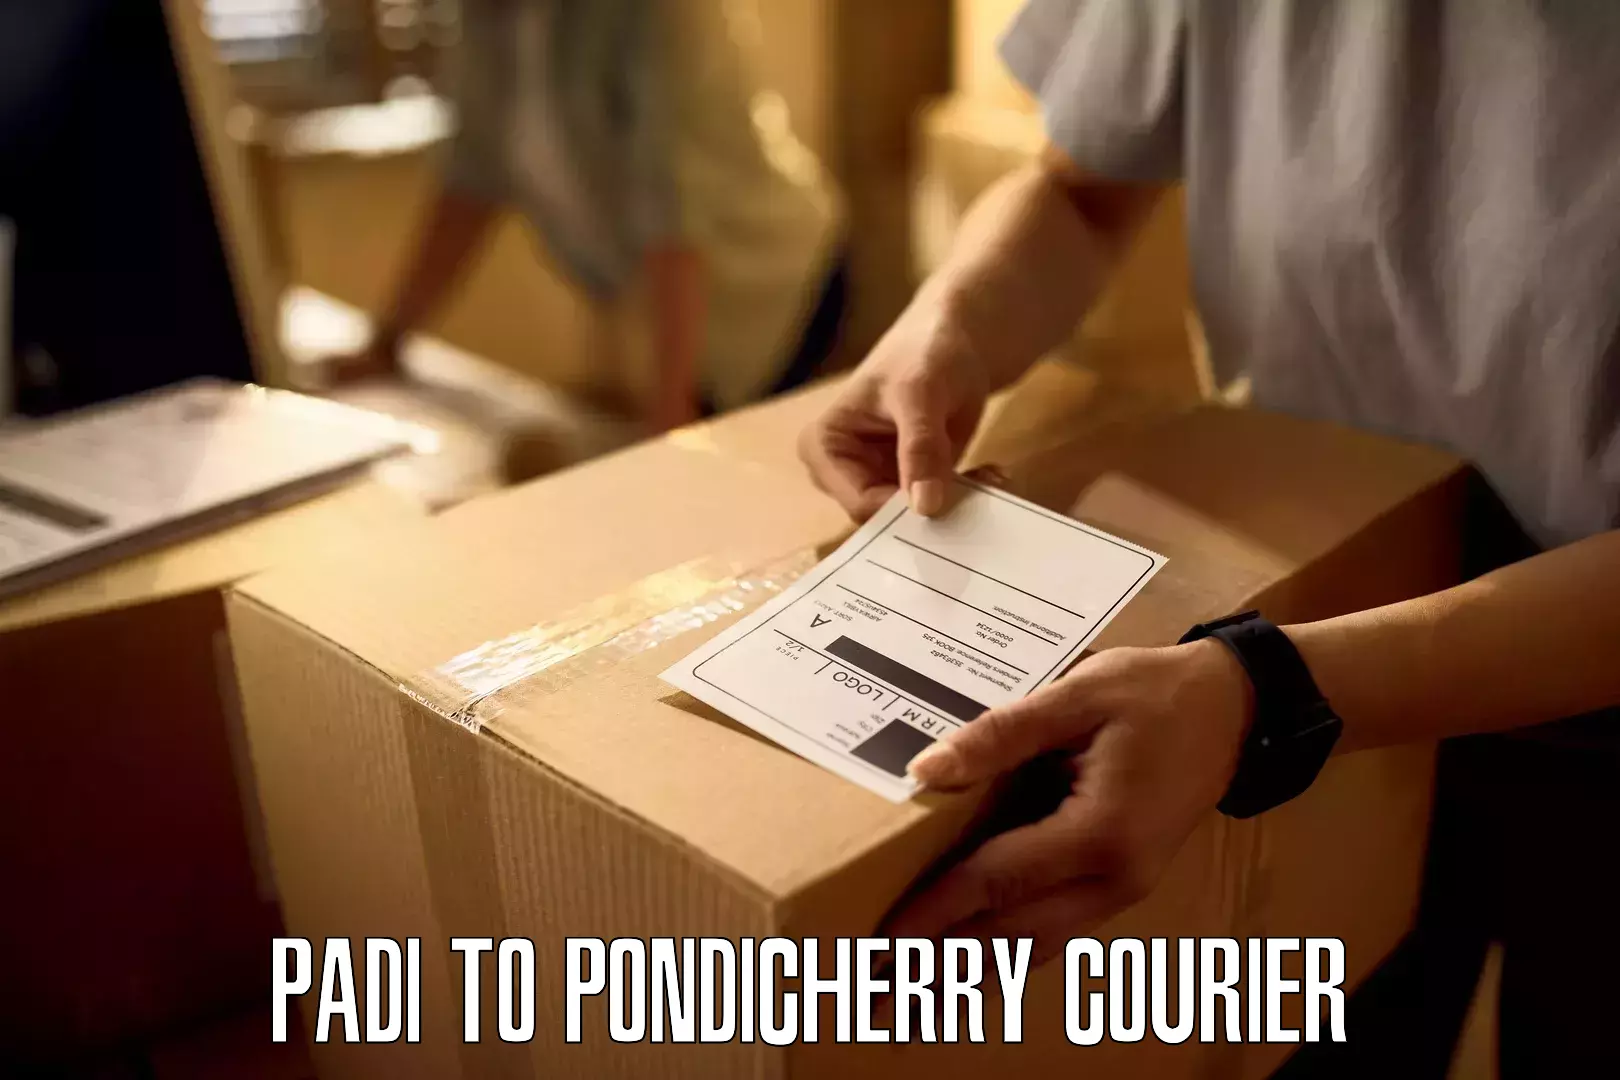 Automated parcel services Padi to Pondicherry